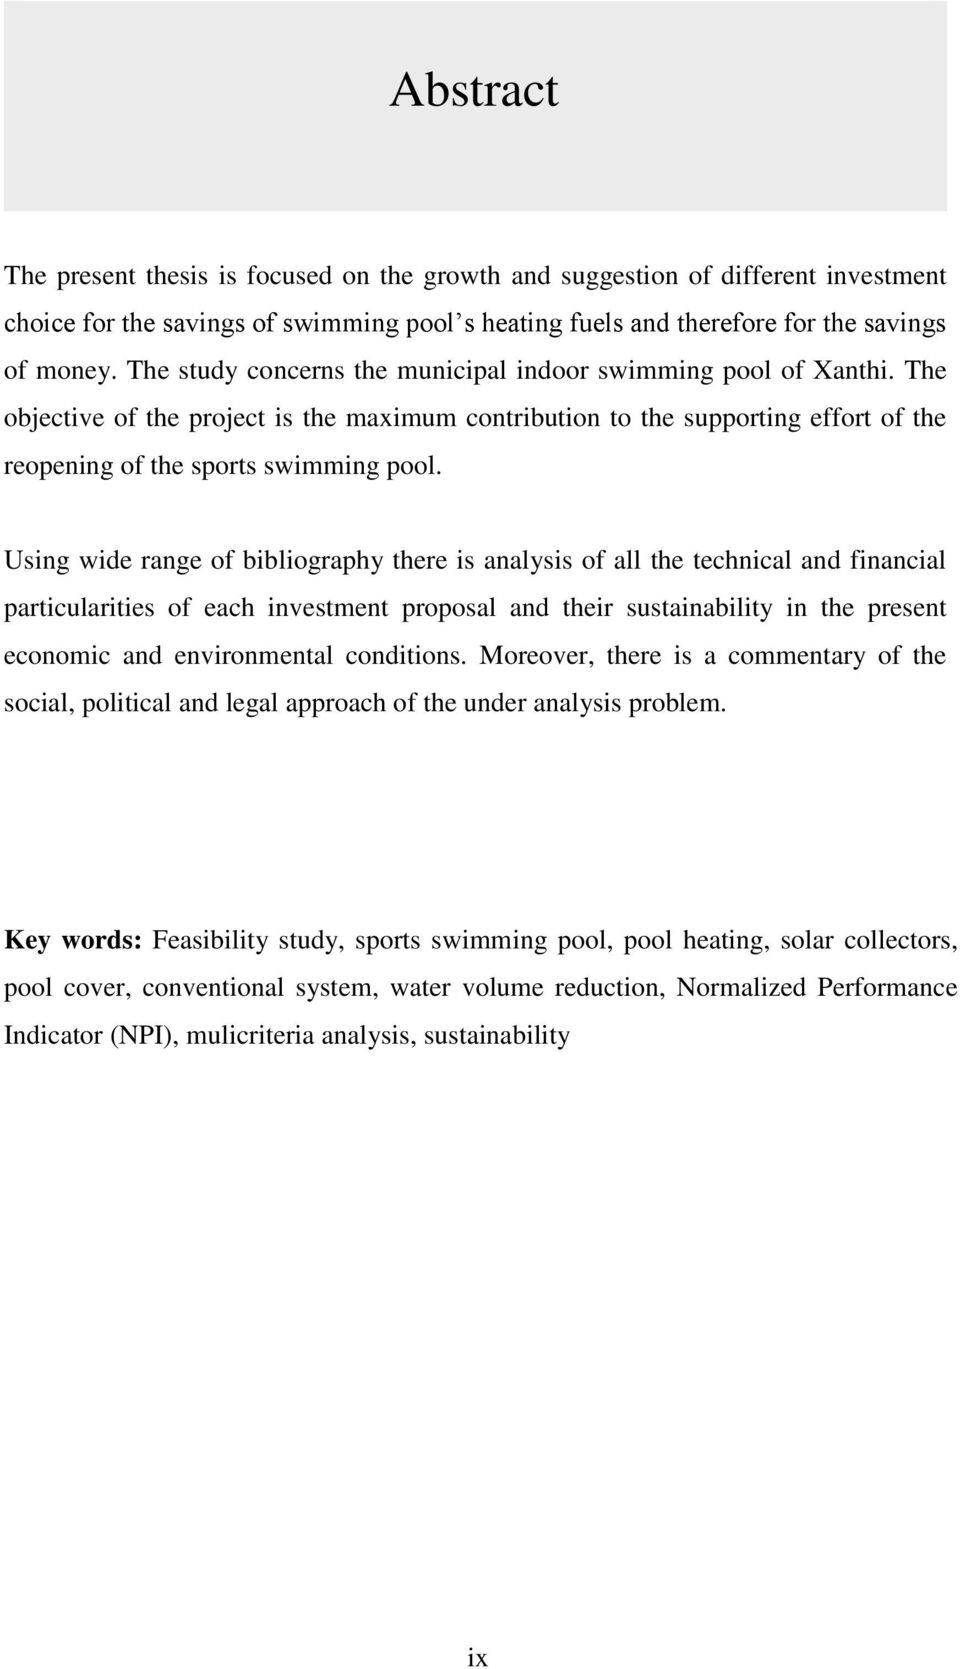 Using wide range of bibliography there is analysis of all the technical and financial particularities of each investment proposal and their sustainability in the present economic and environmental